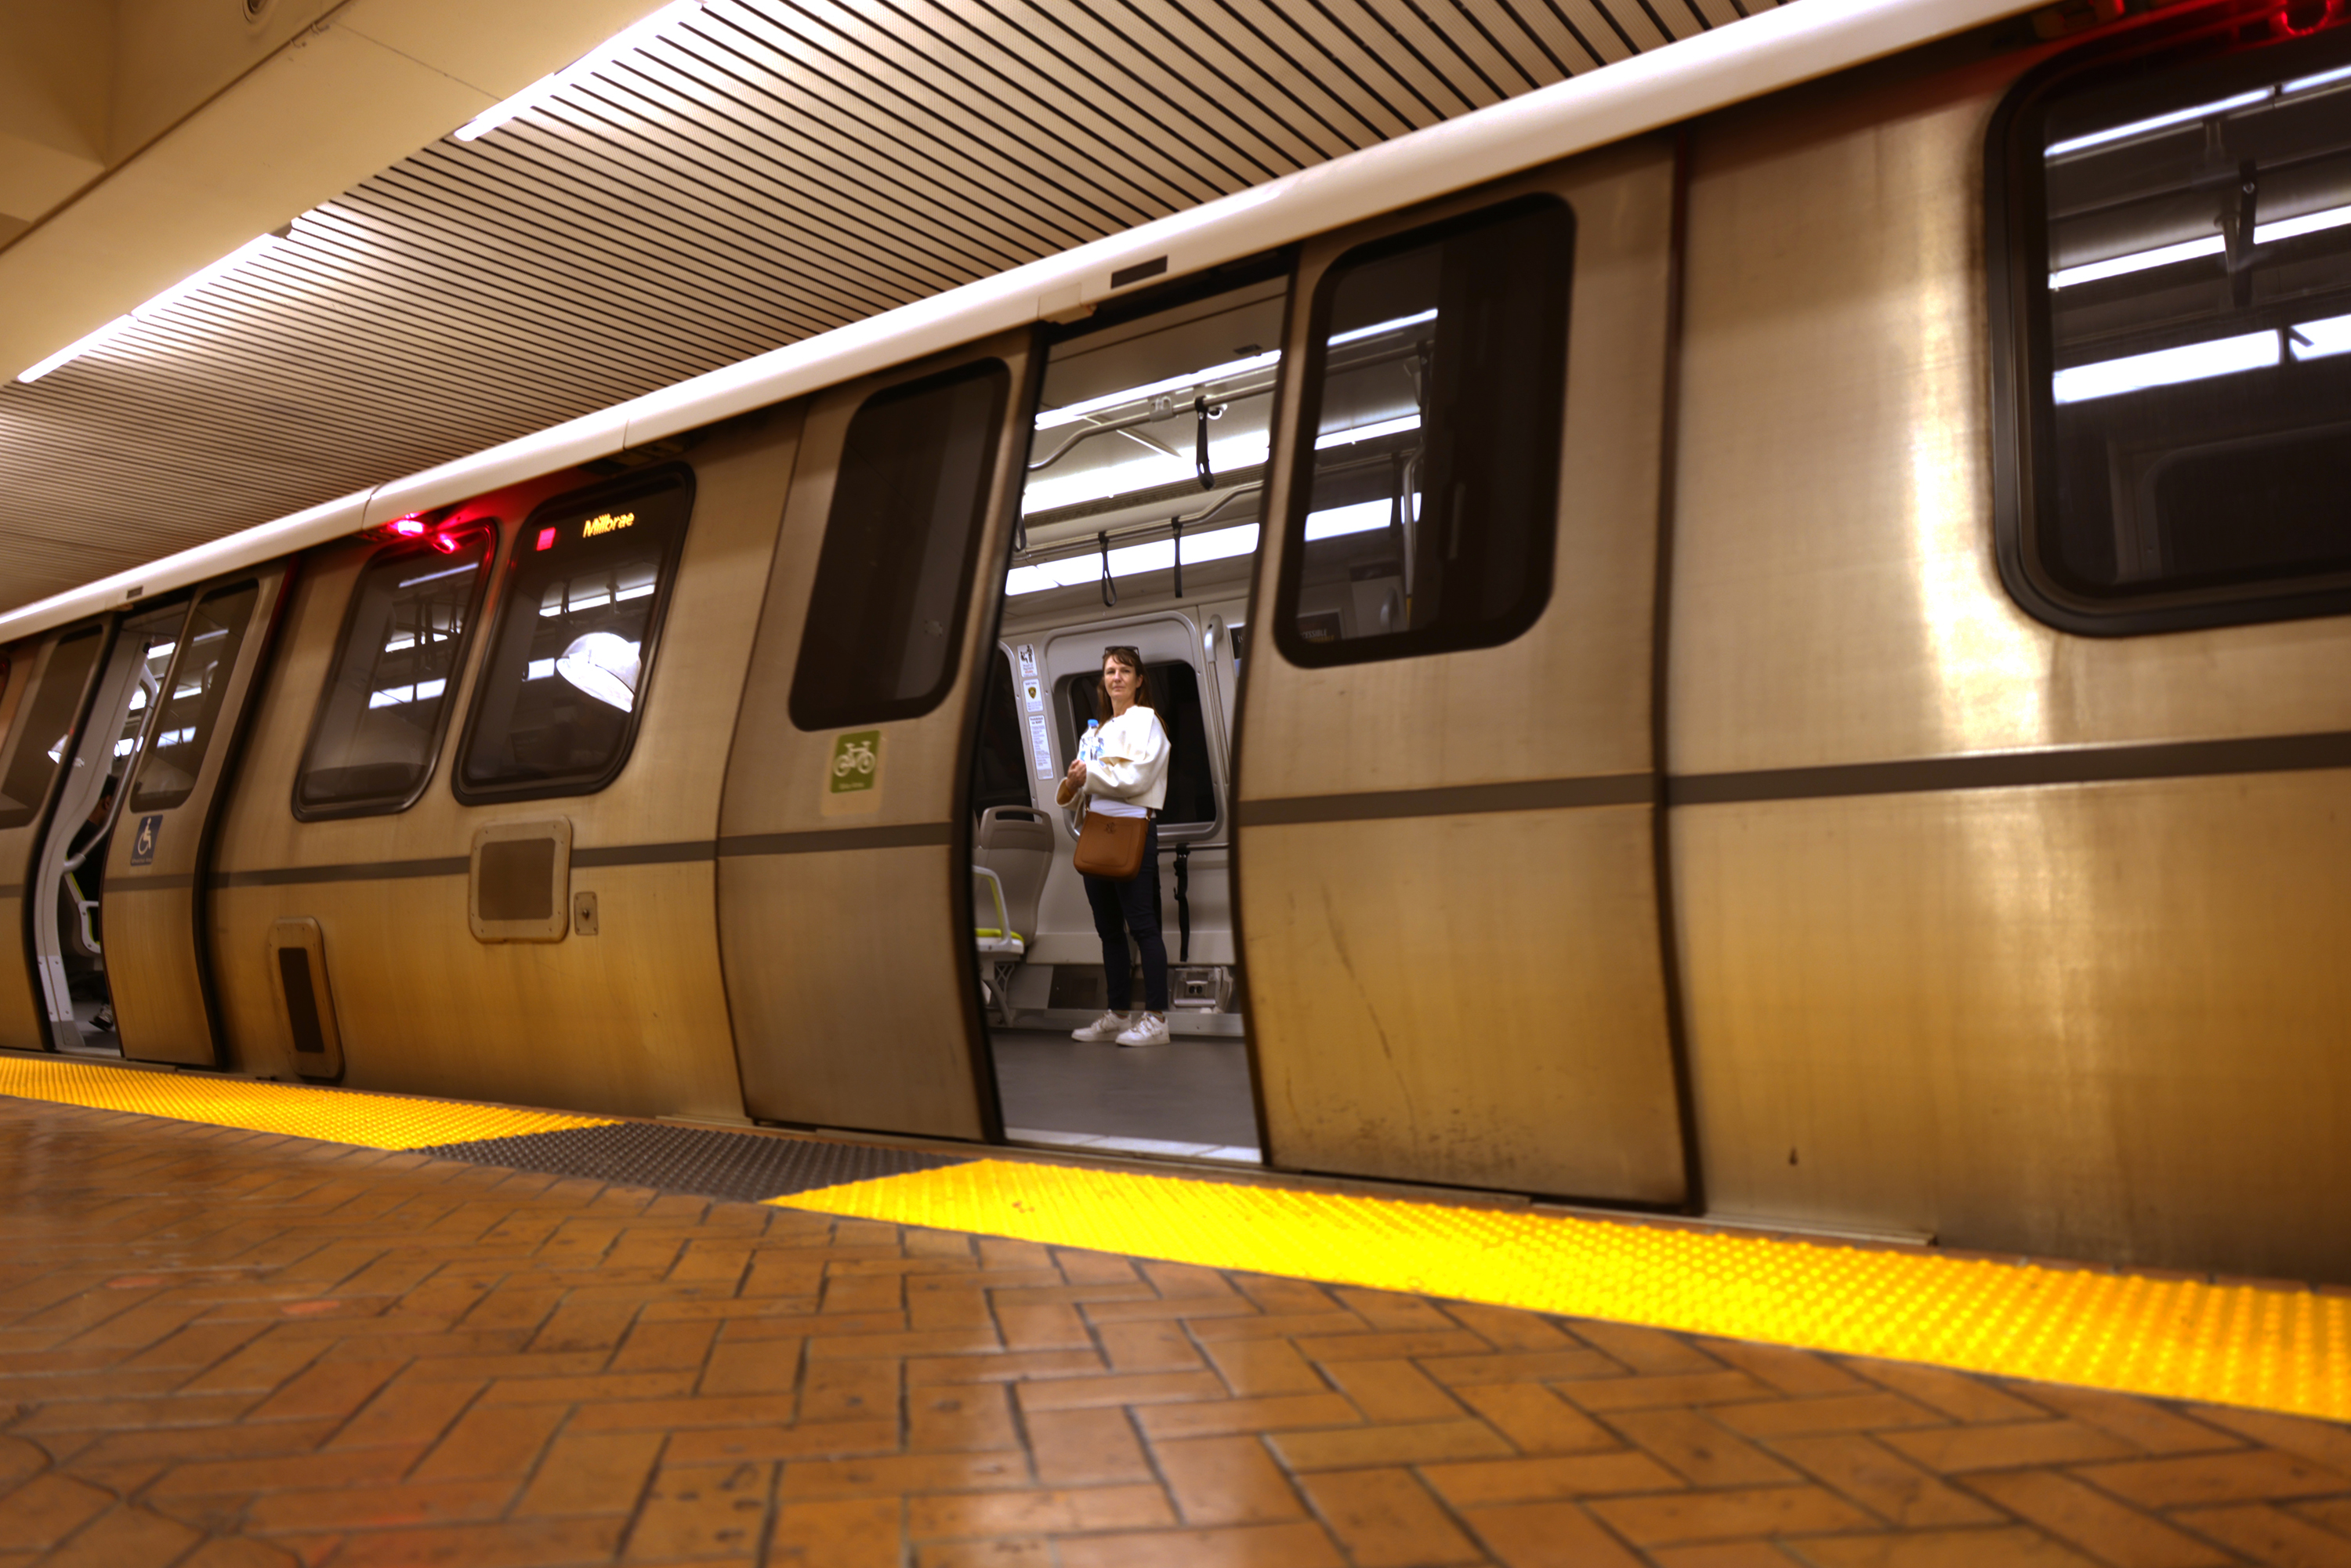 A lone person stands inside a stationary, open-doored subway car, with a beige interior, on a platform with yellow safety markings and brown tiles.